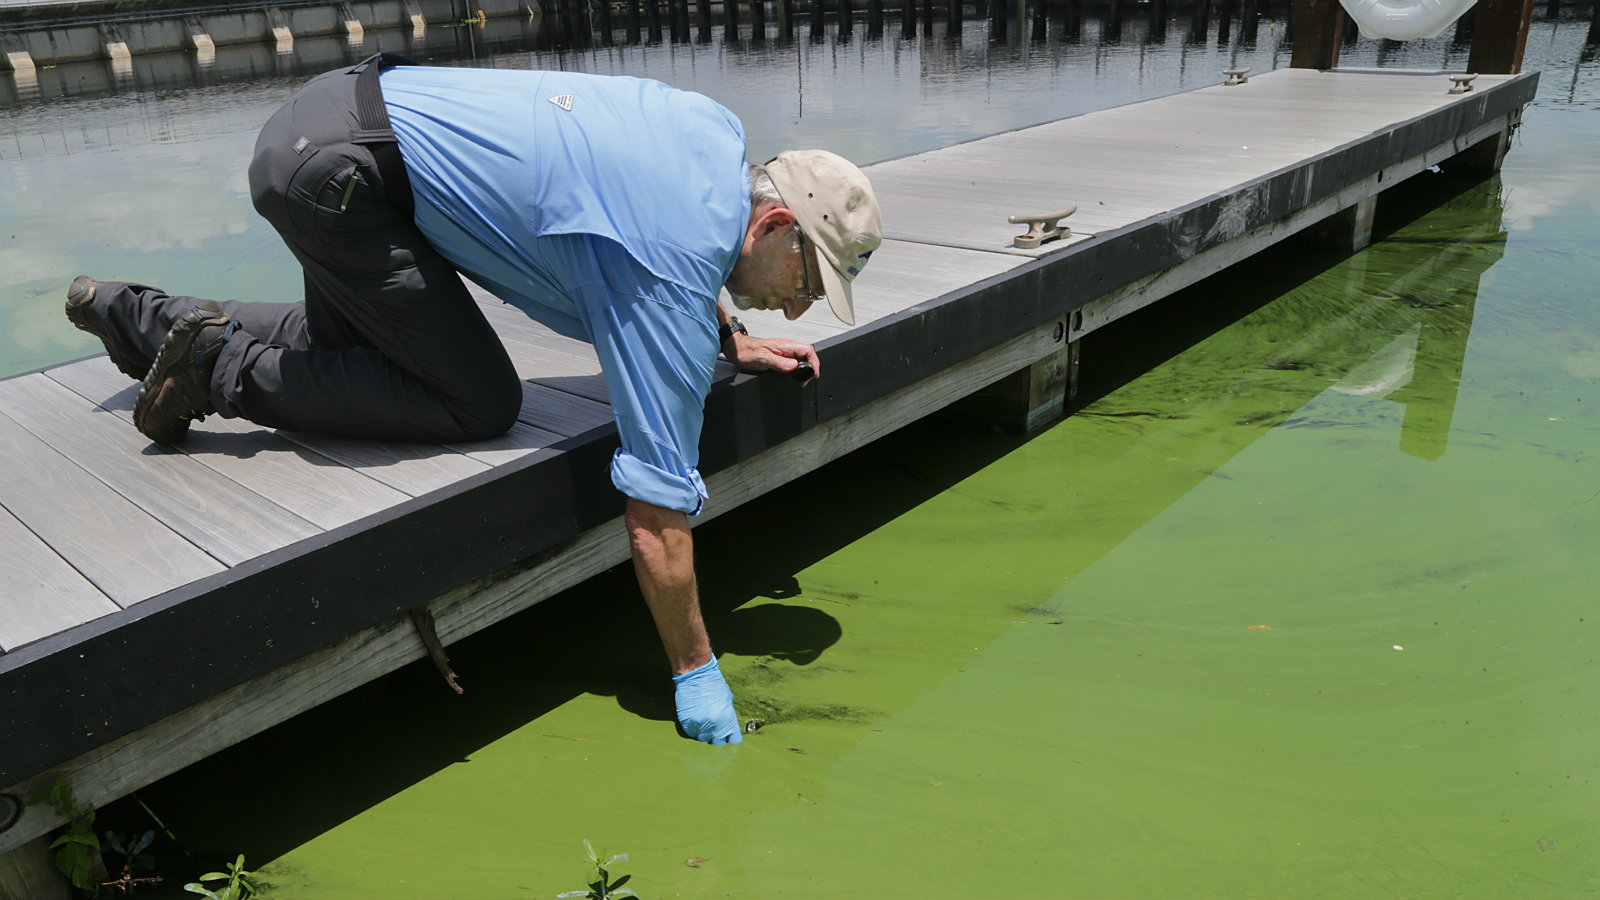 Minnows blamed for algae-filled French and Spanish lakes - The